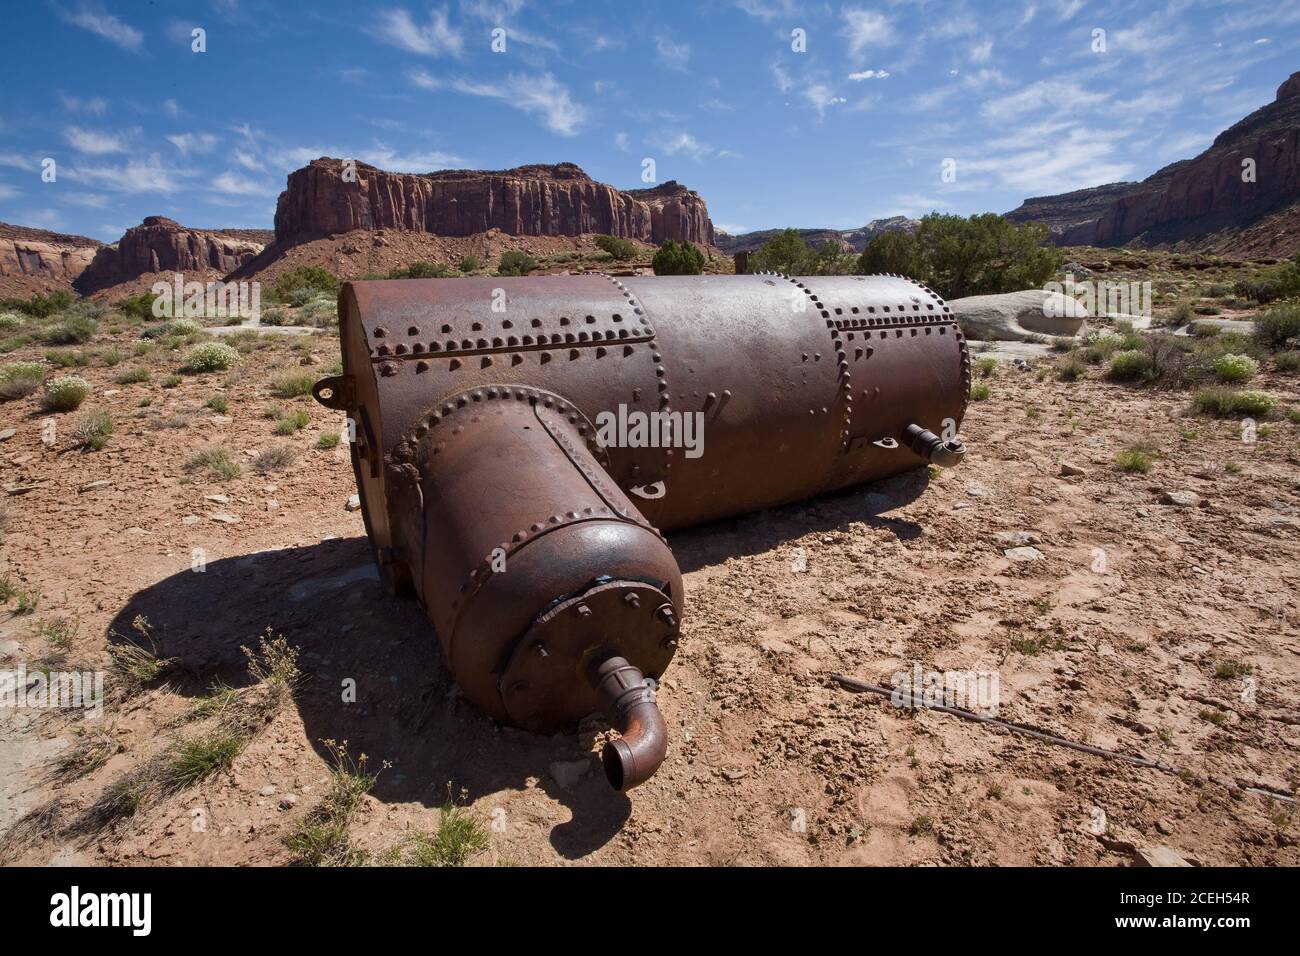 An old steam boiler at the site of an old uranium mine in the canyon country of southeastern Utah. Stock Photo